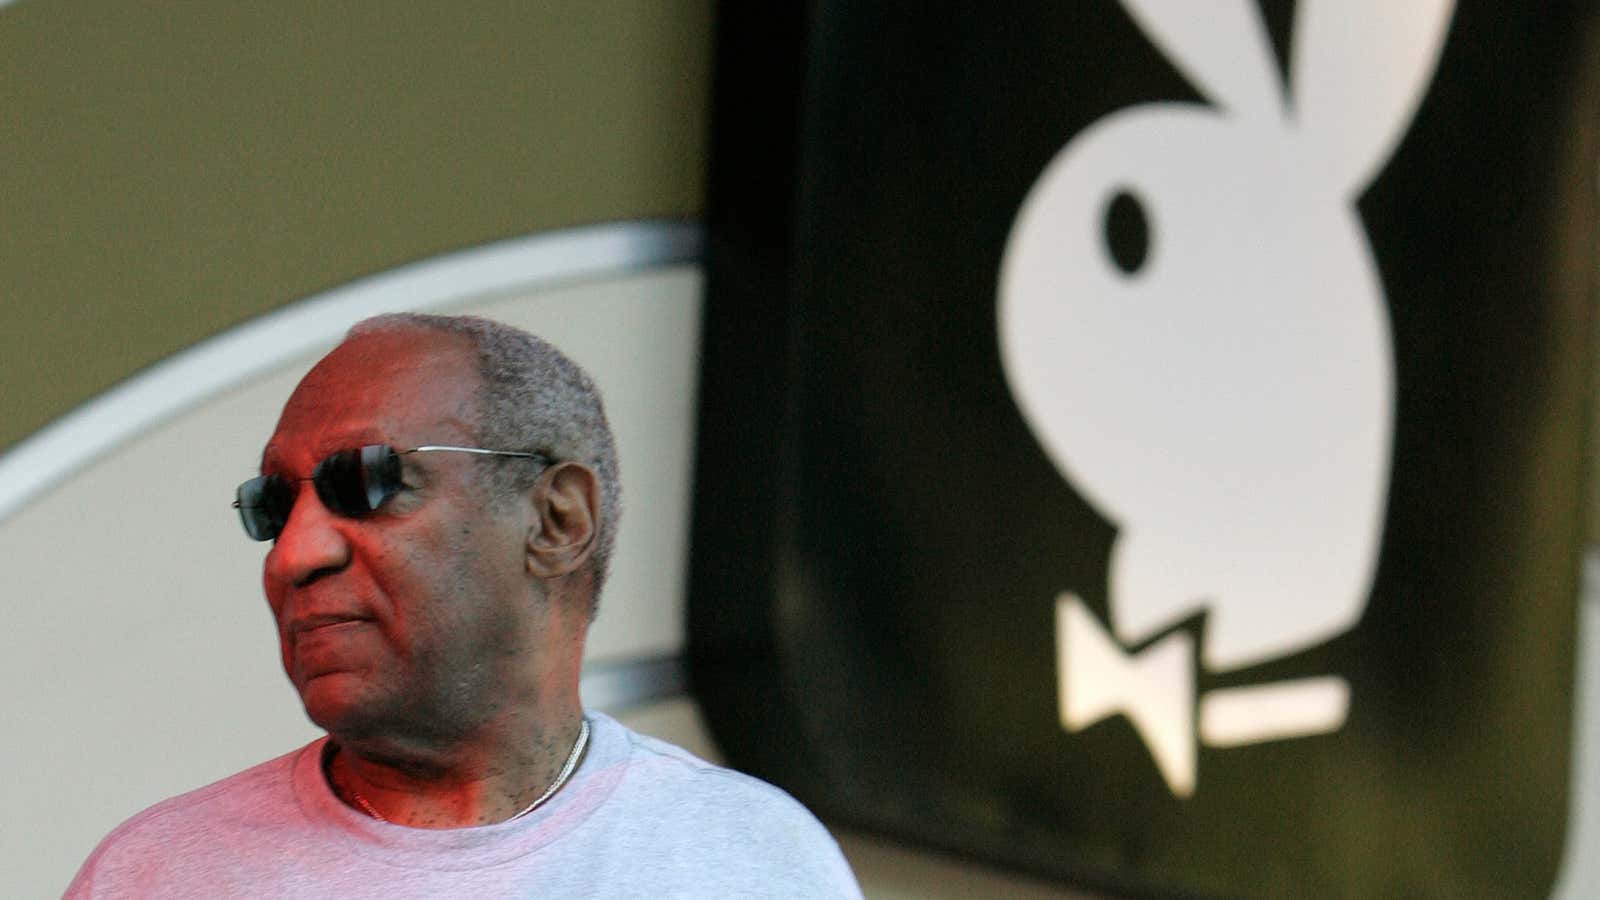 Cosby was a longtime emcee of the Playboy Jazz Festival.